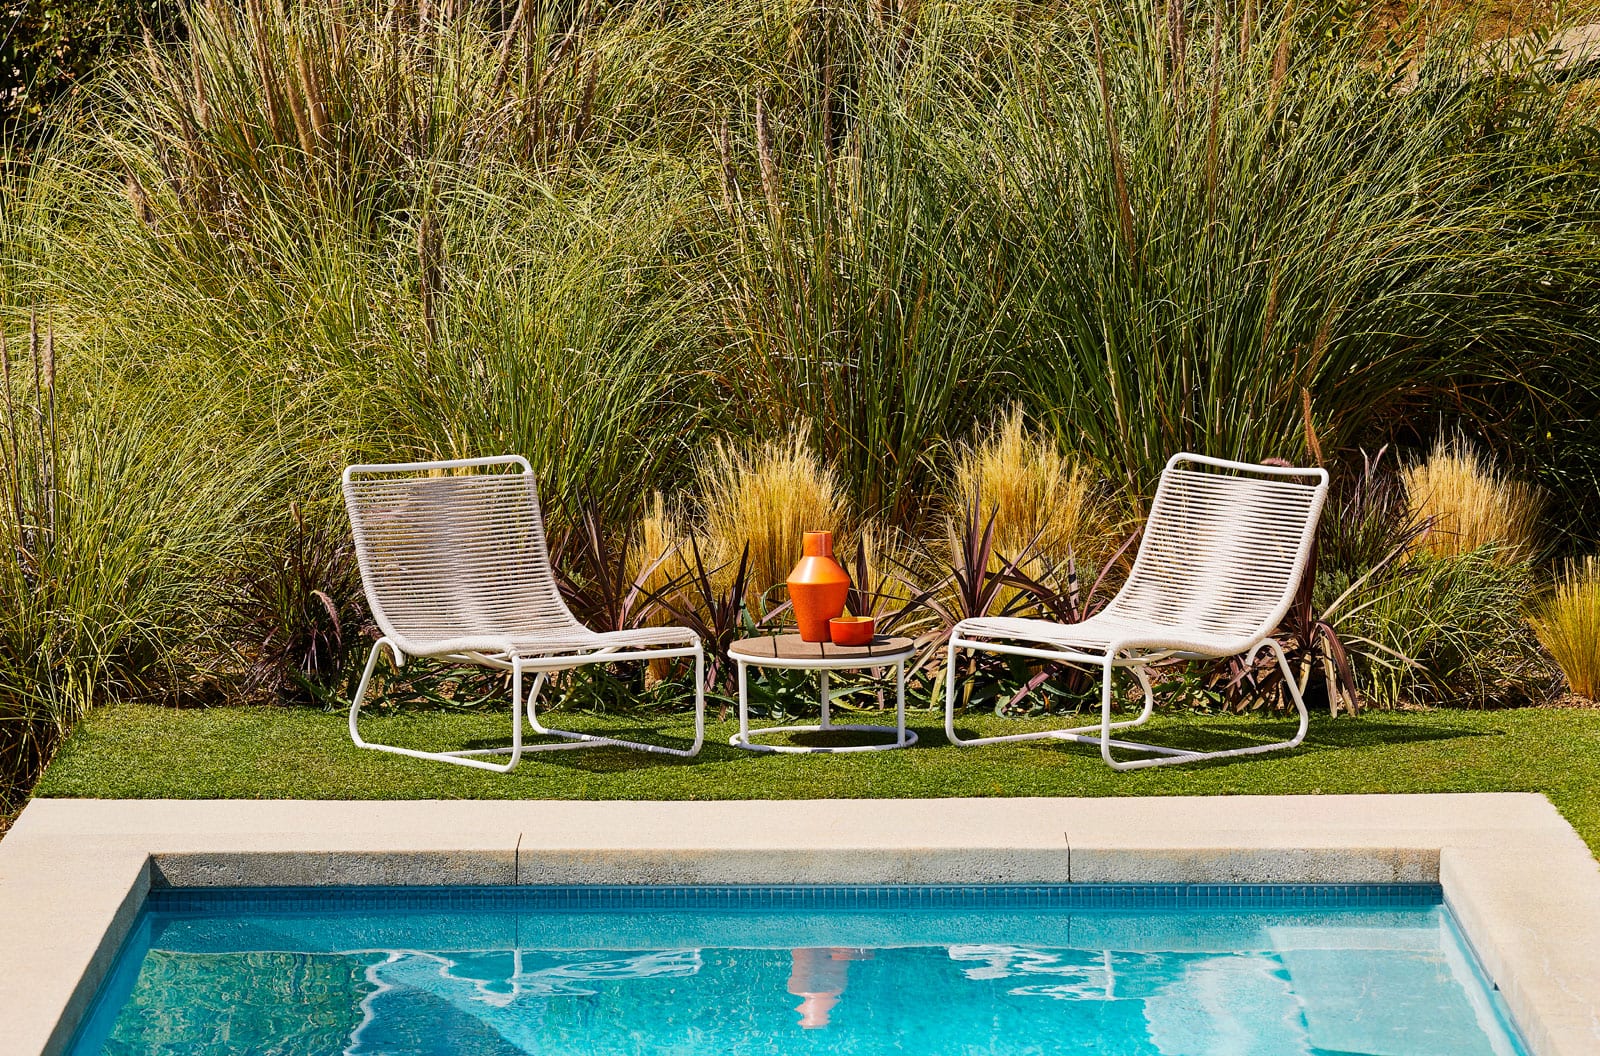 Walter Lamb aluminum lounge chairs from Brown Jordan outdoor furniture placed on grass facing a swimming pool with a decorative landscape background